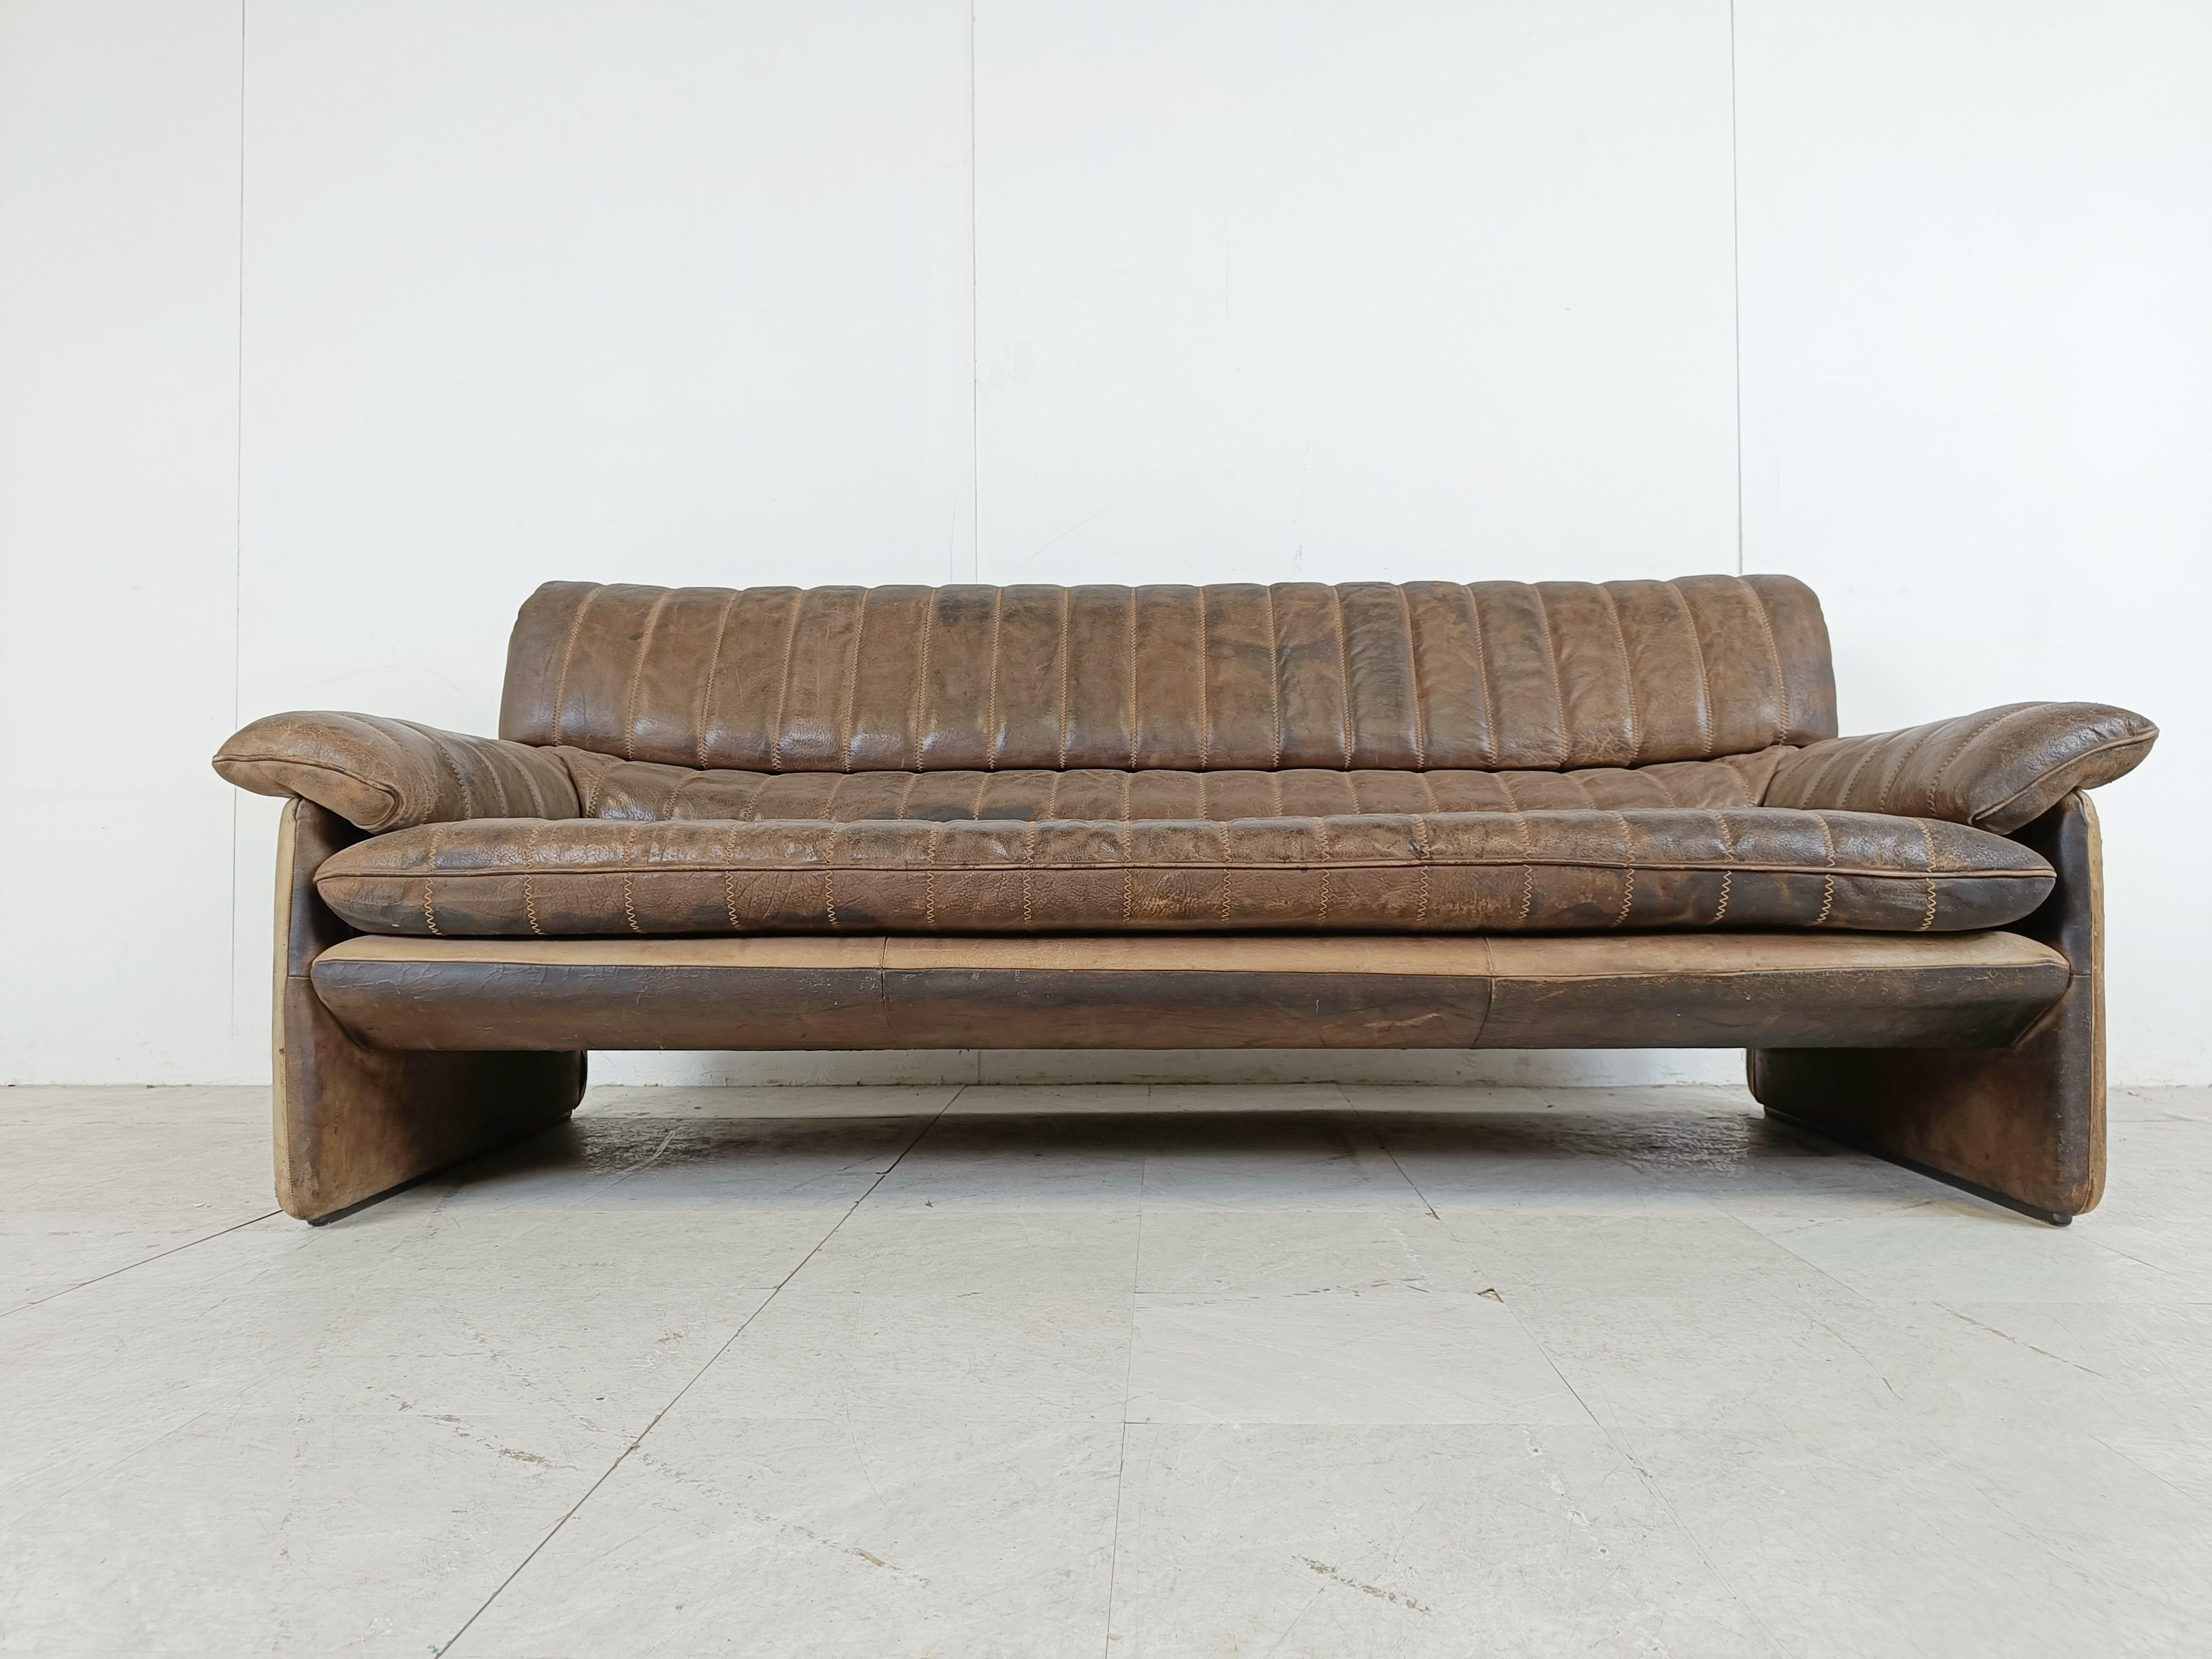 Swiss De Sede Ds86 Sofa in Brown Leather, 1970s For Sale